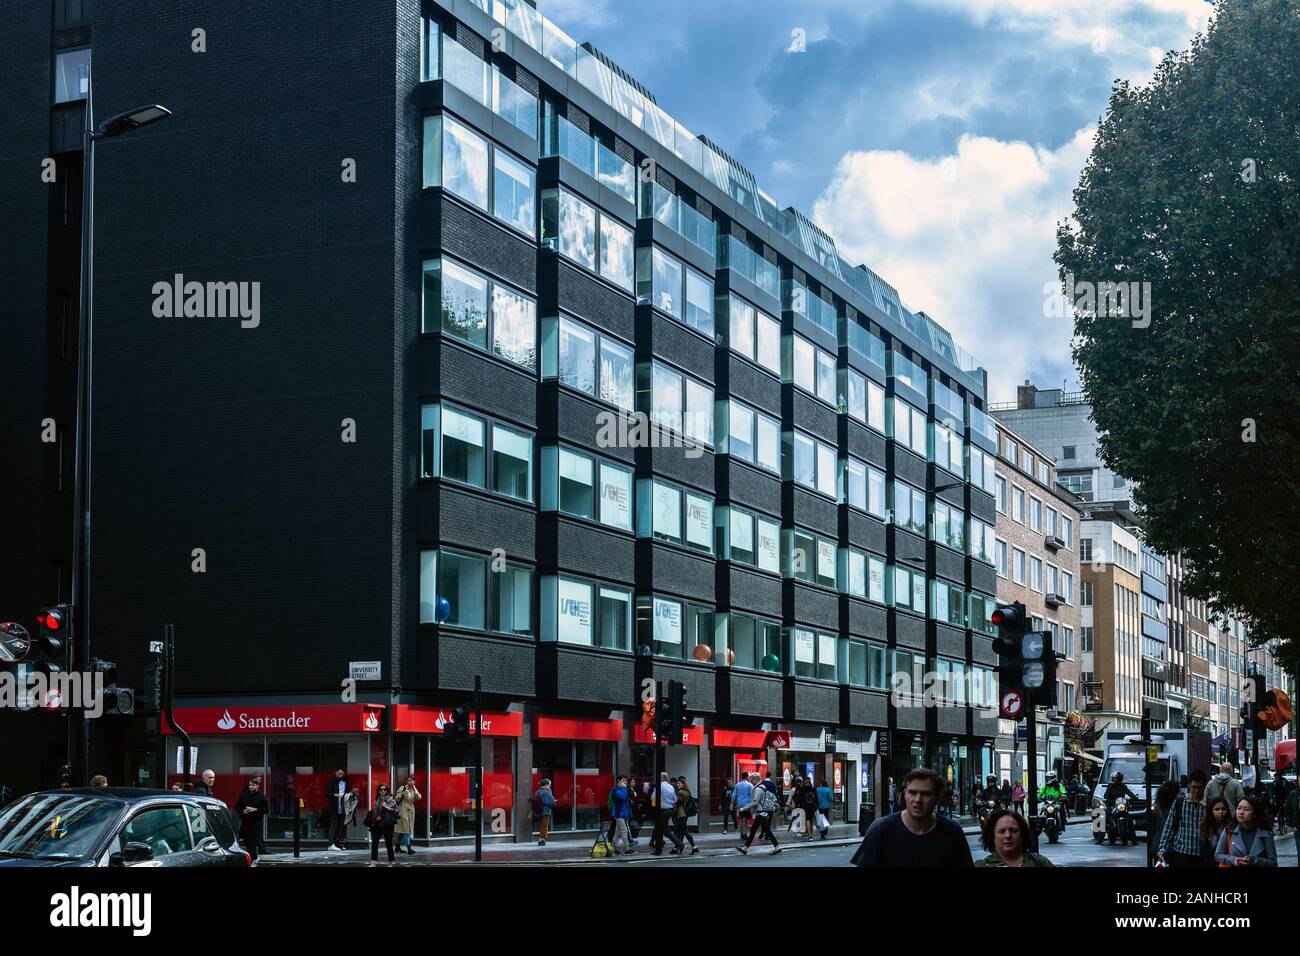 Front facade of a mid-rise office building on Tottenham Court Road, London, England, UK. Stock Photo